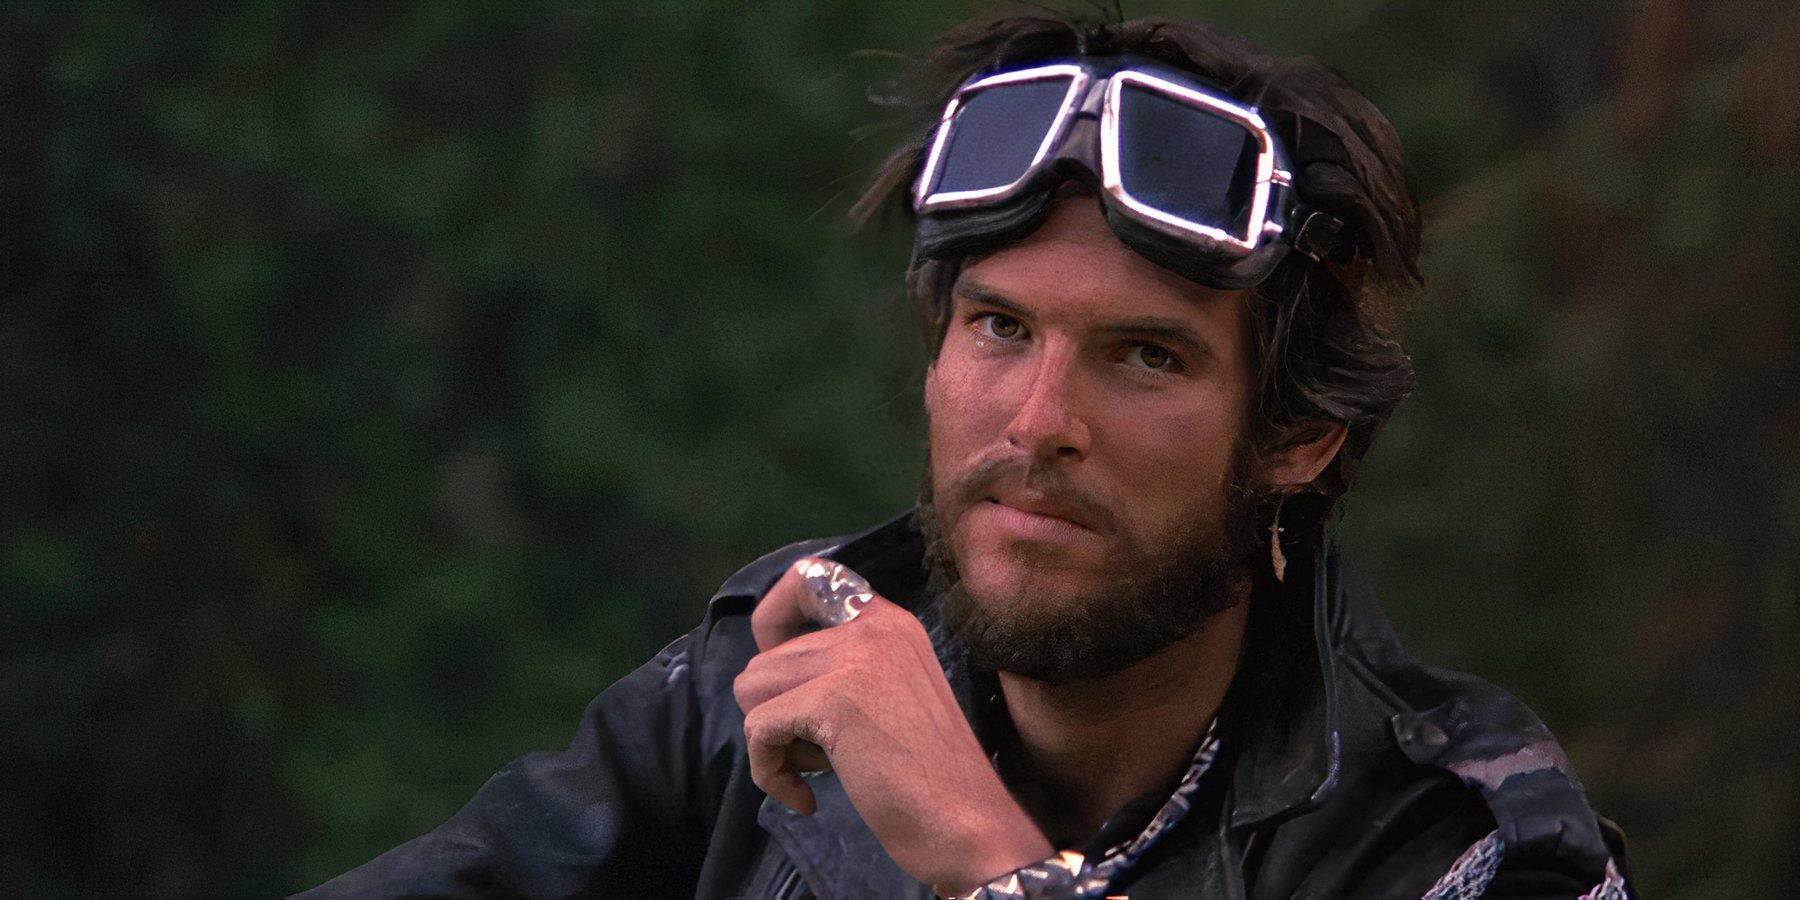 Pierce Brosnan in a motorcyclist outfit looking intently ahead in 'Nomads'